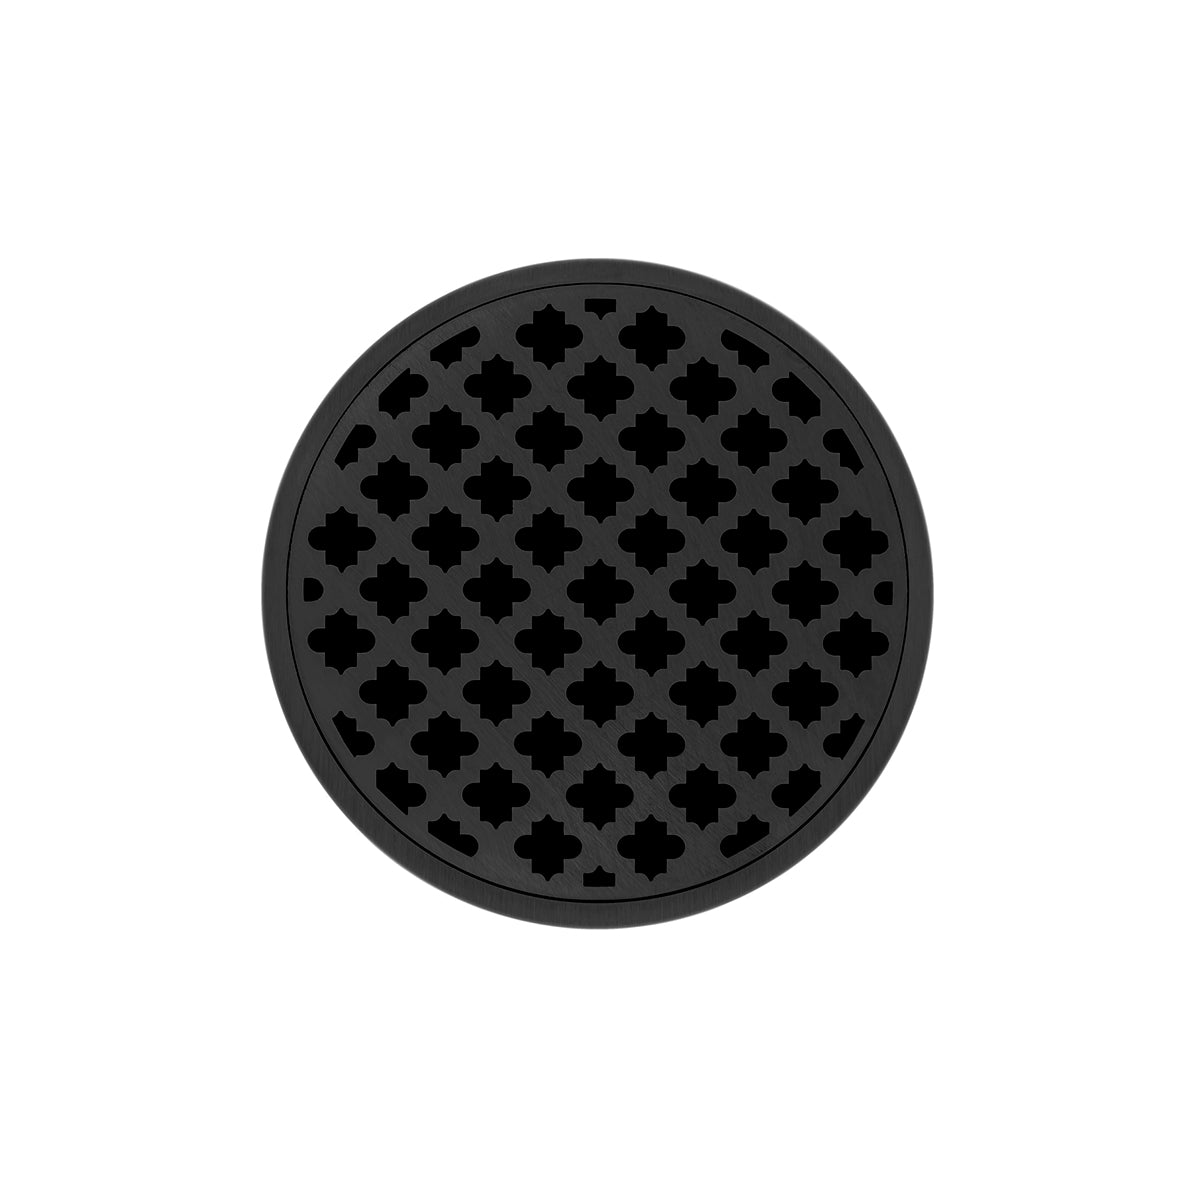 Infinity Drain 5" Round RMDB 5 Premium Center Drain Kit with Moor Pattern Decorative Plate with Stainless Steel Bonded Flange Drain Body, 2" No Hub Outlet